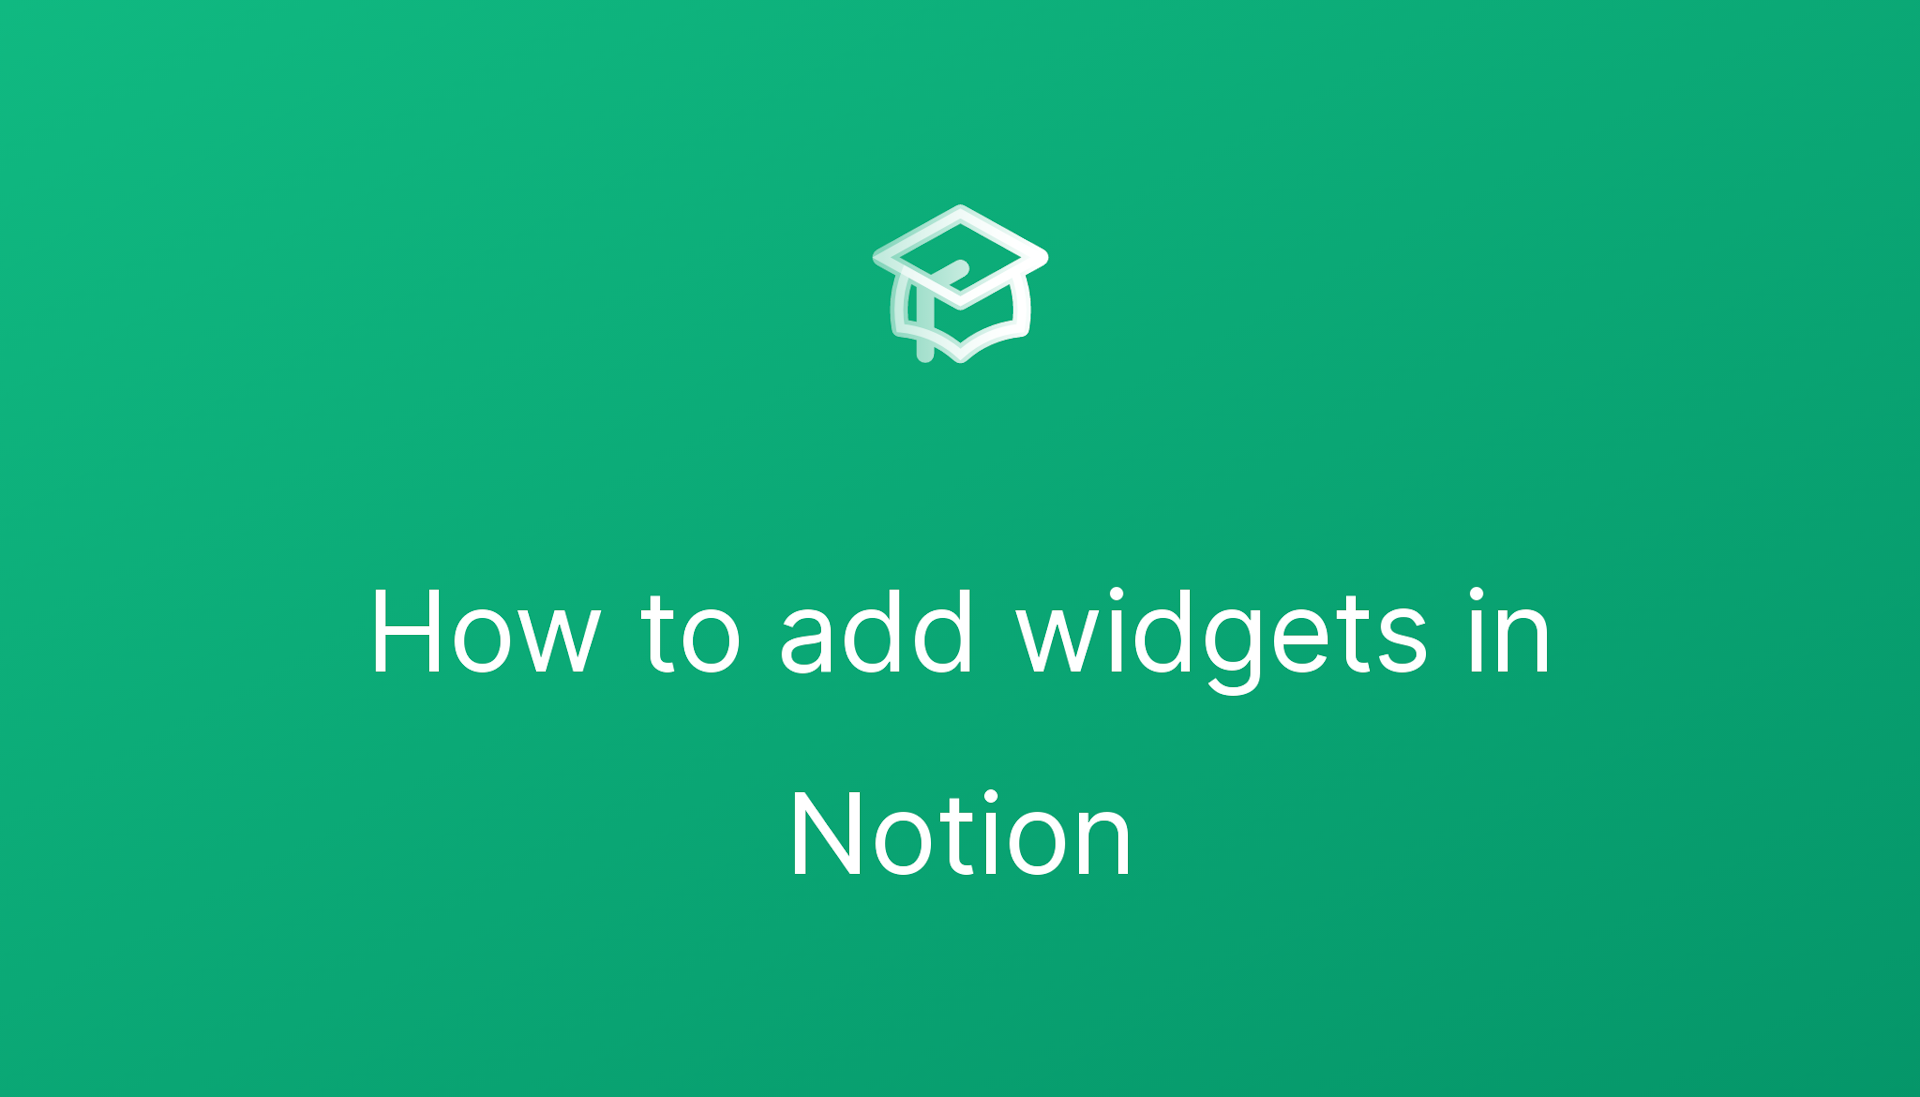 How to add widgets in Notion